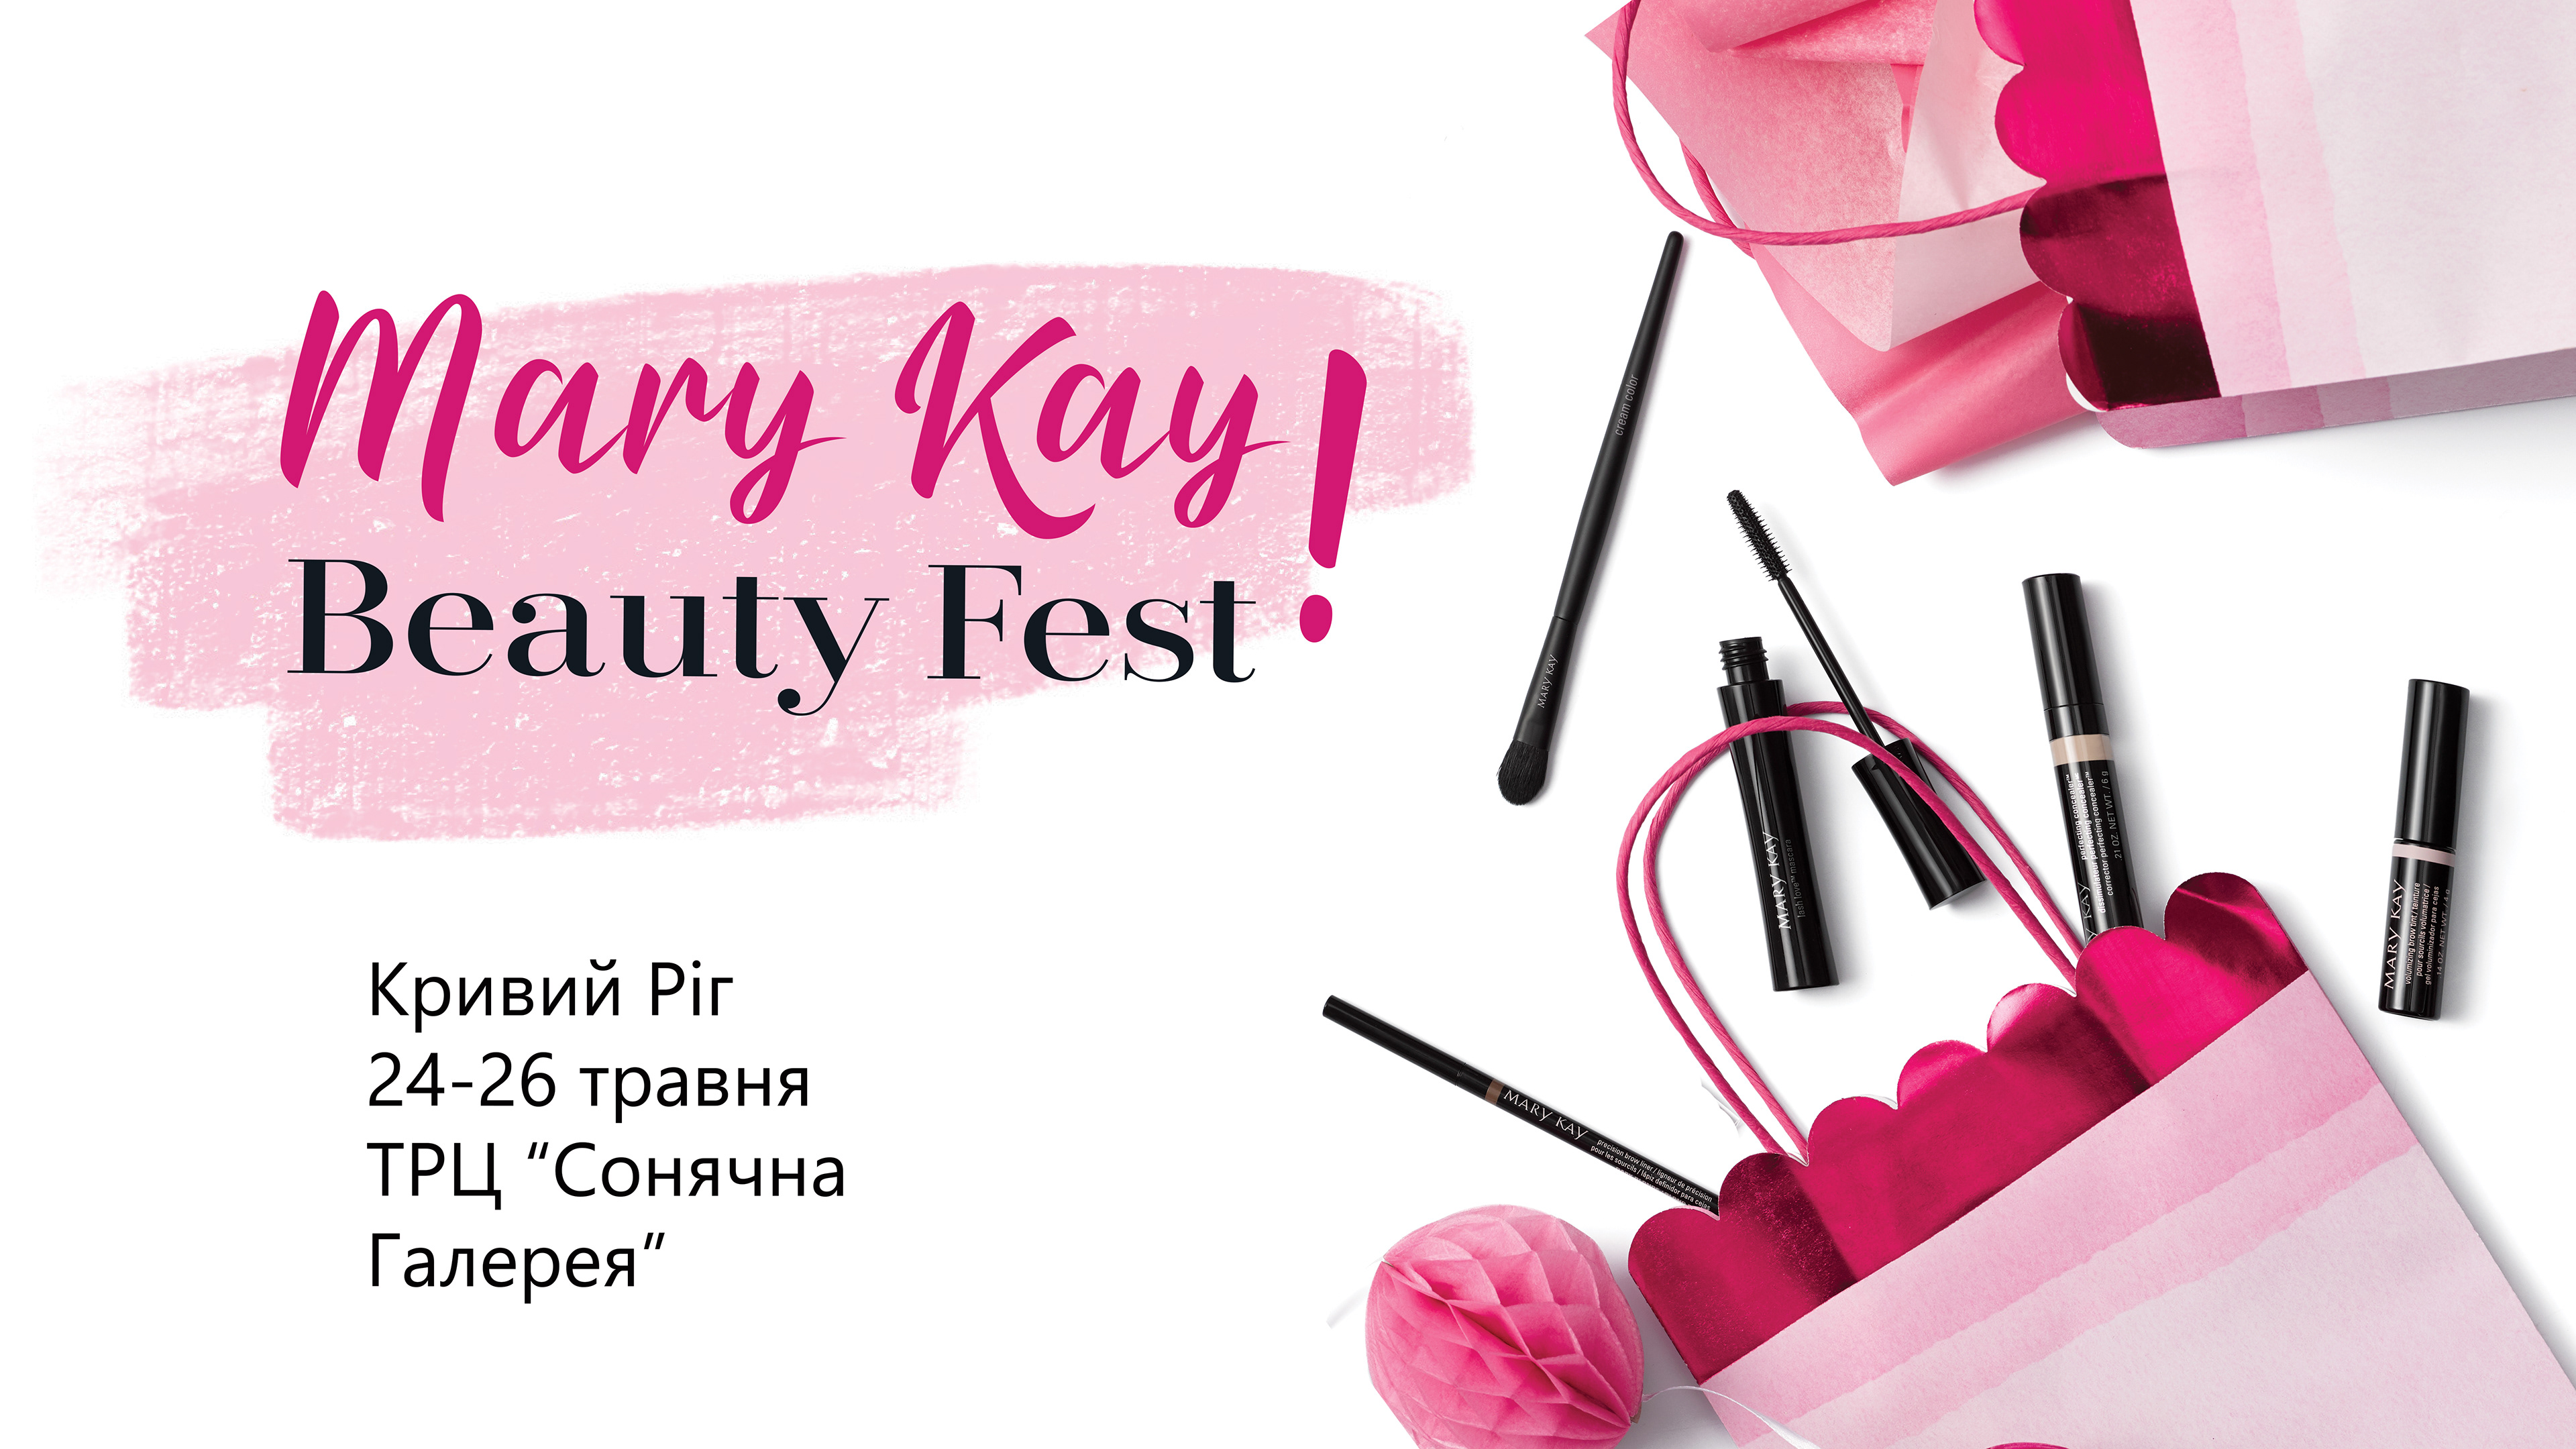 Mariia Margulis - Visual Content for Mary Kay.